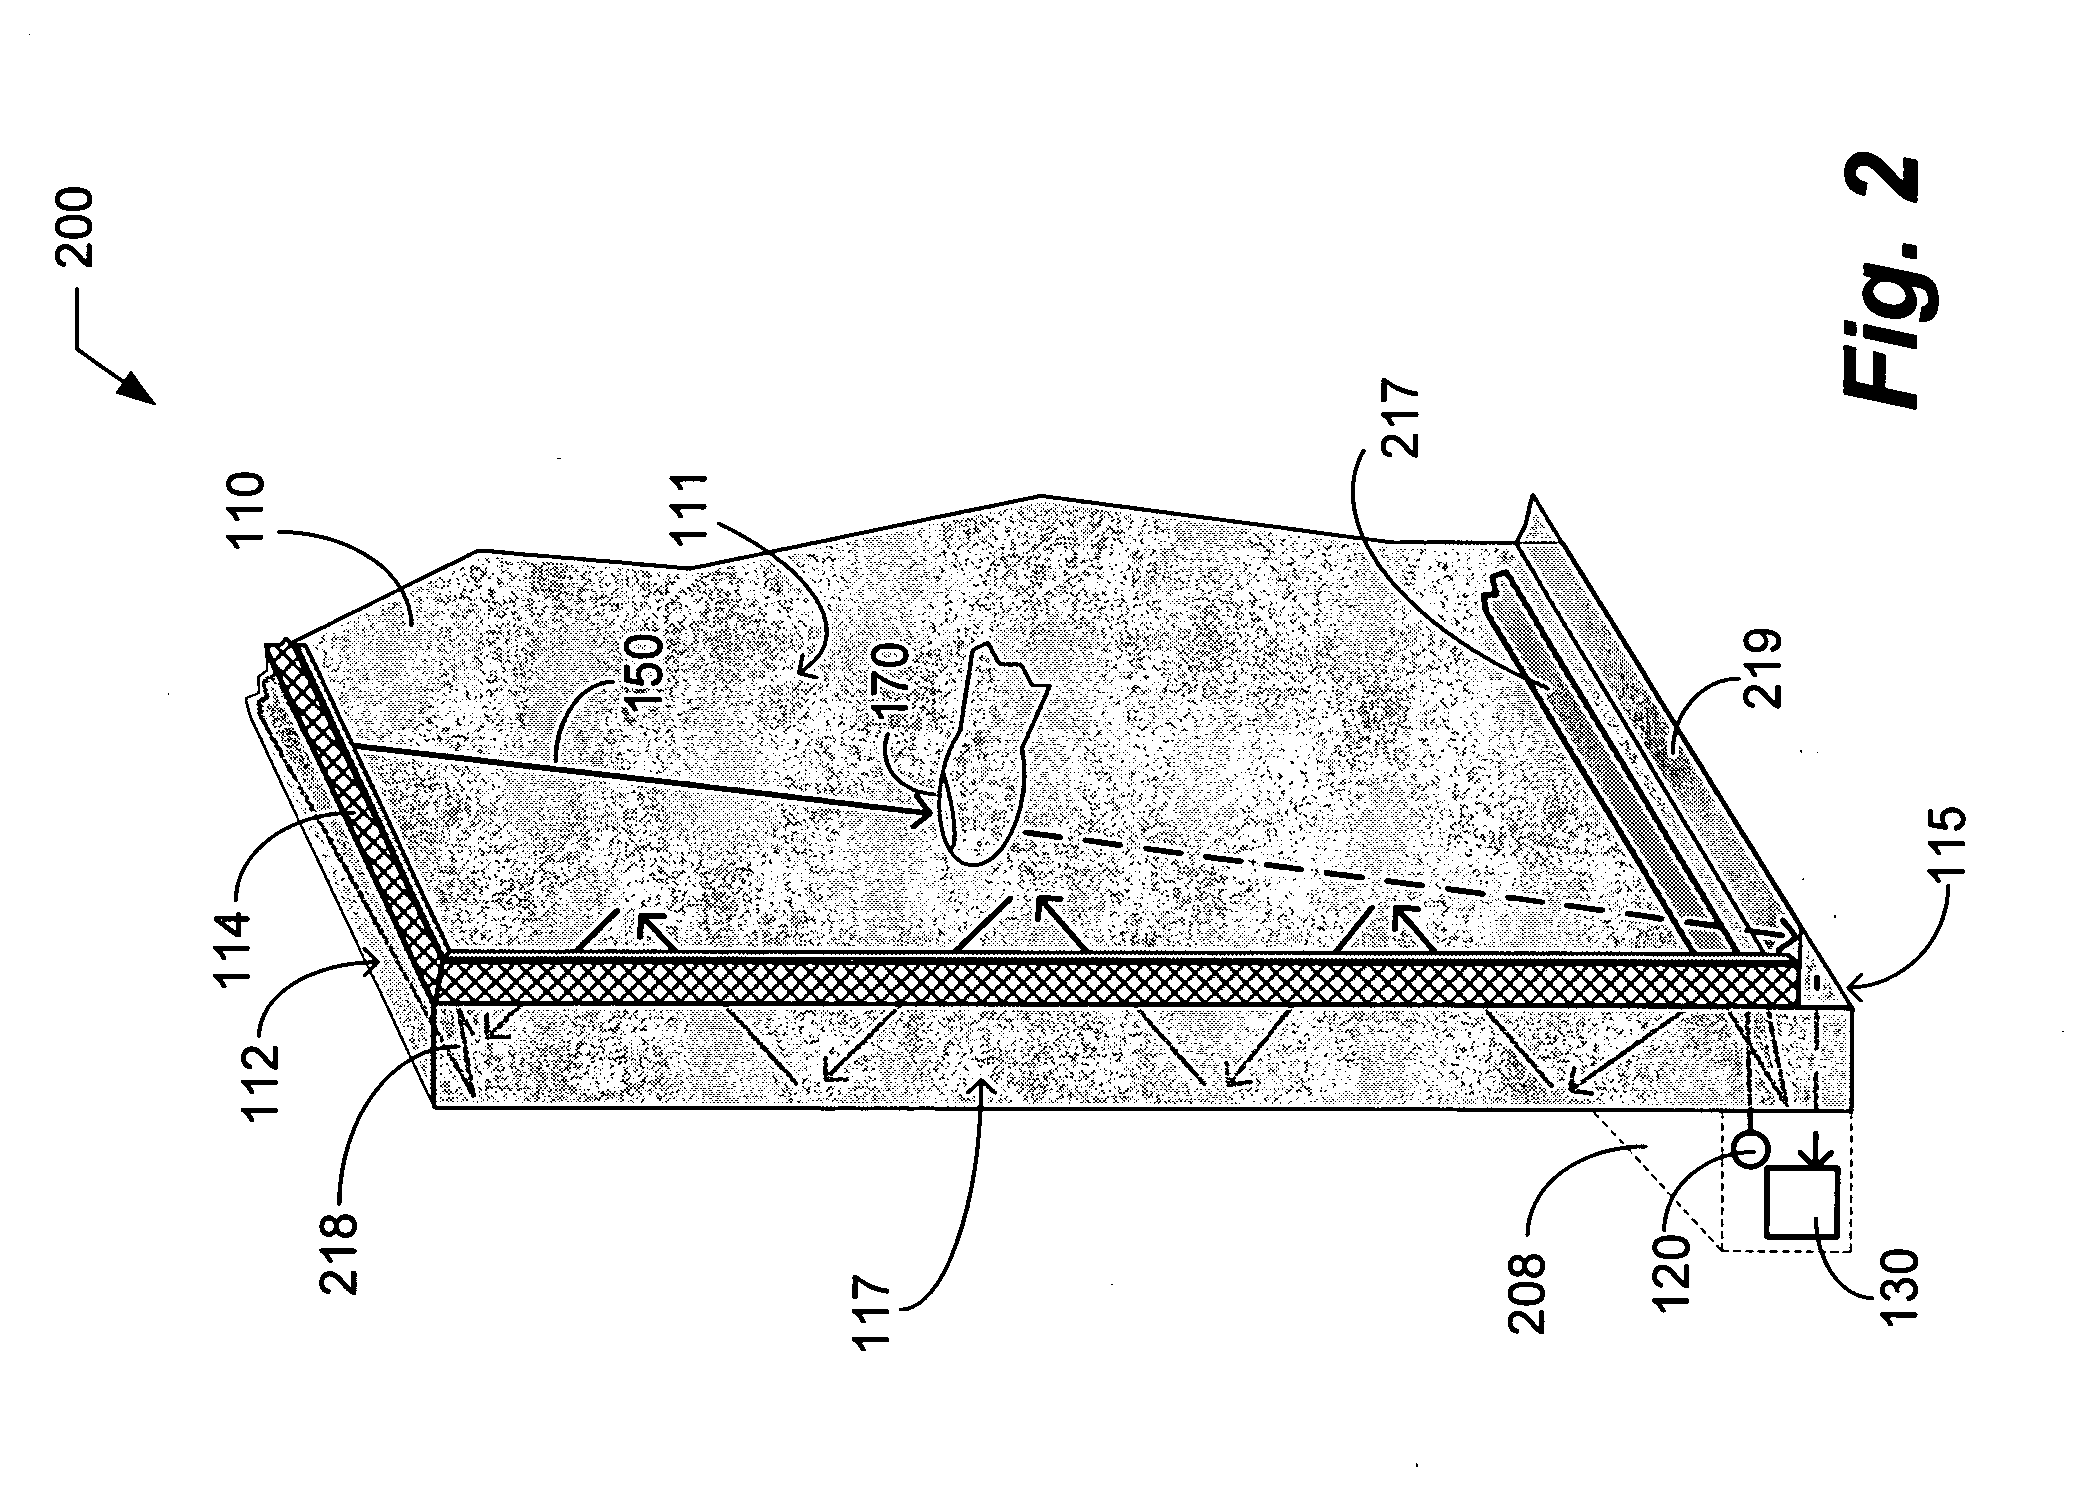 Touch panel display system with illumination and detection provided from a single edge